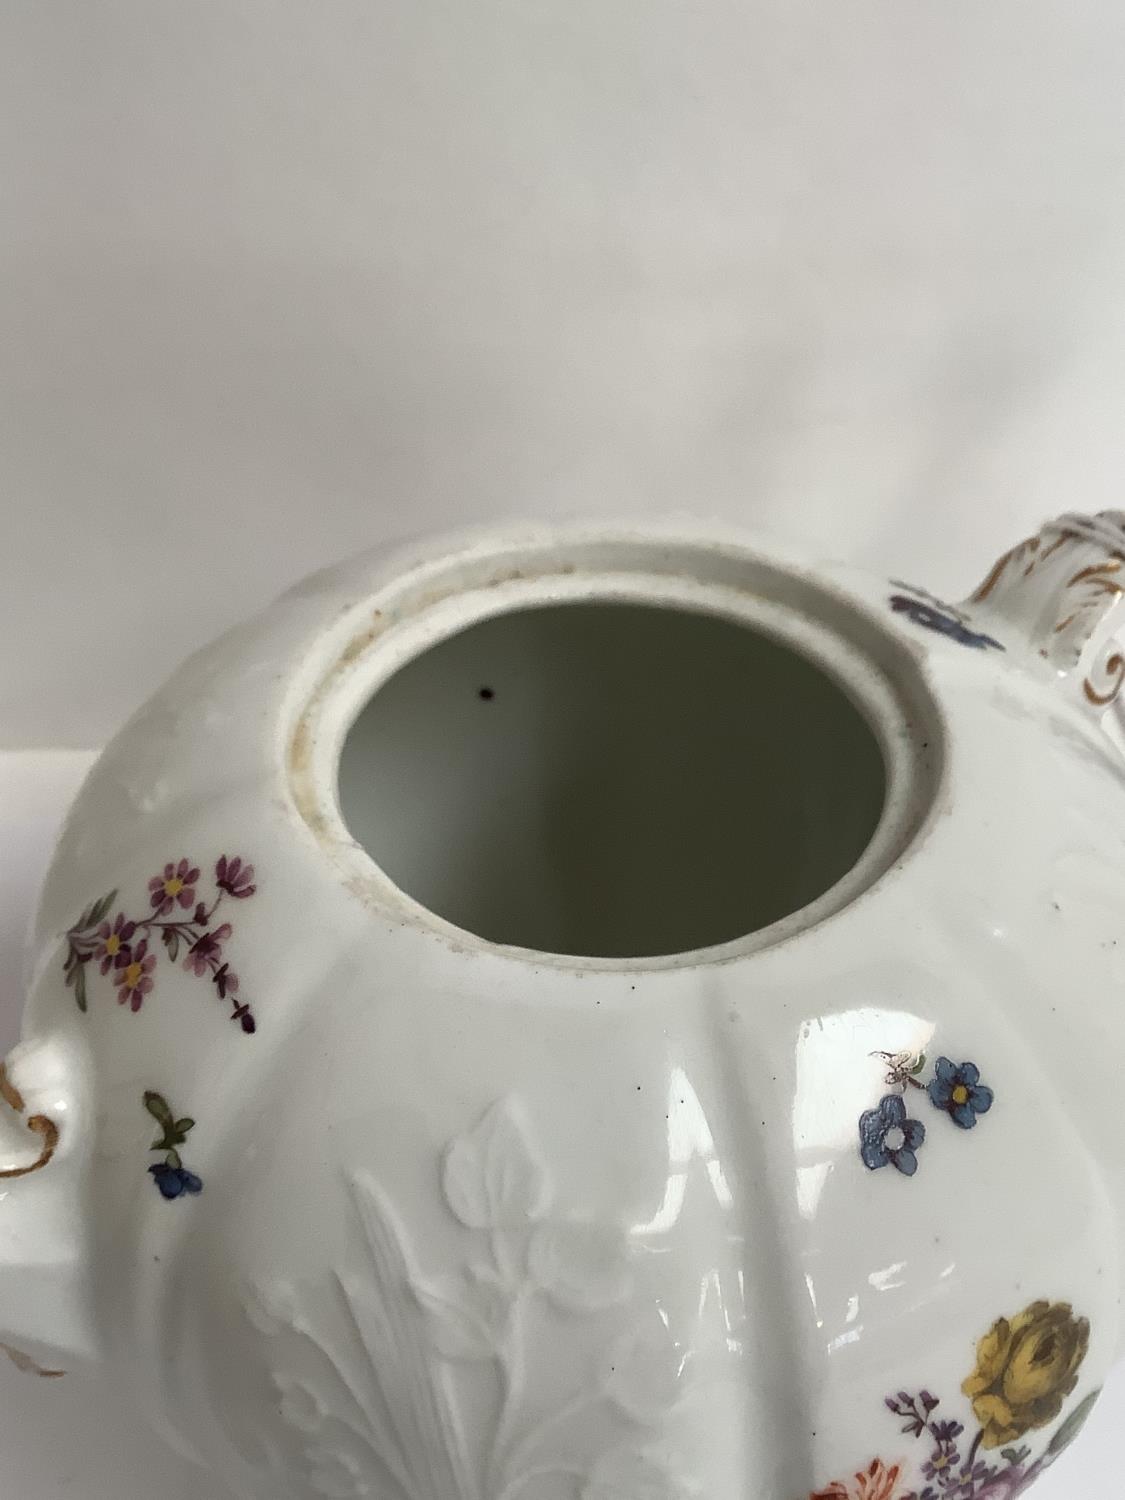 Meissen porcelain teapot, possibly C18th, enamelled with flowers, underglaze relief moulding, - Image 9 of 17